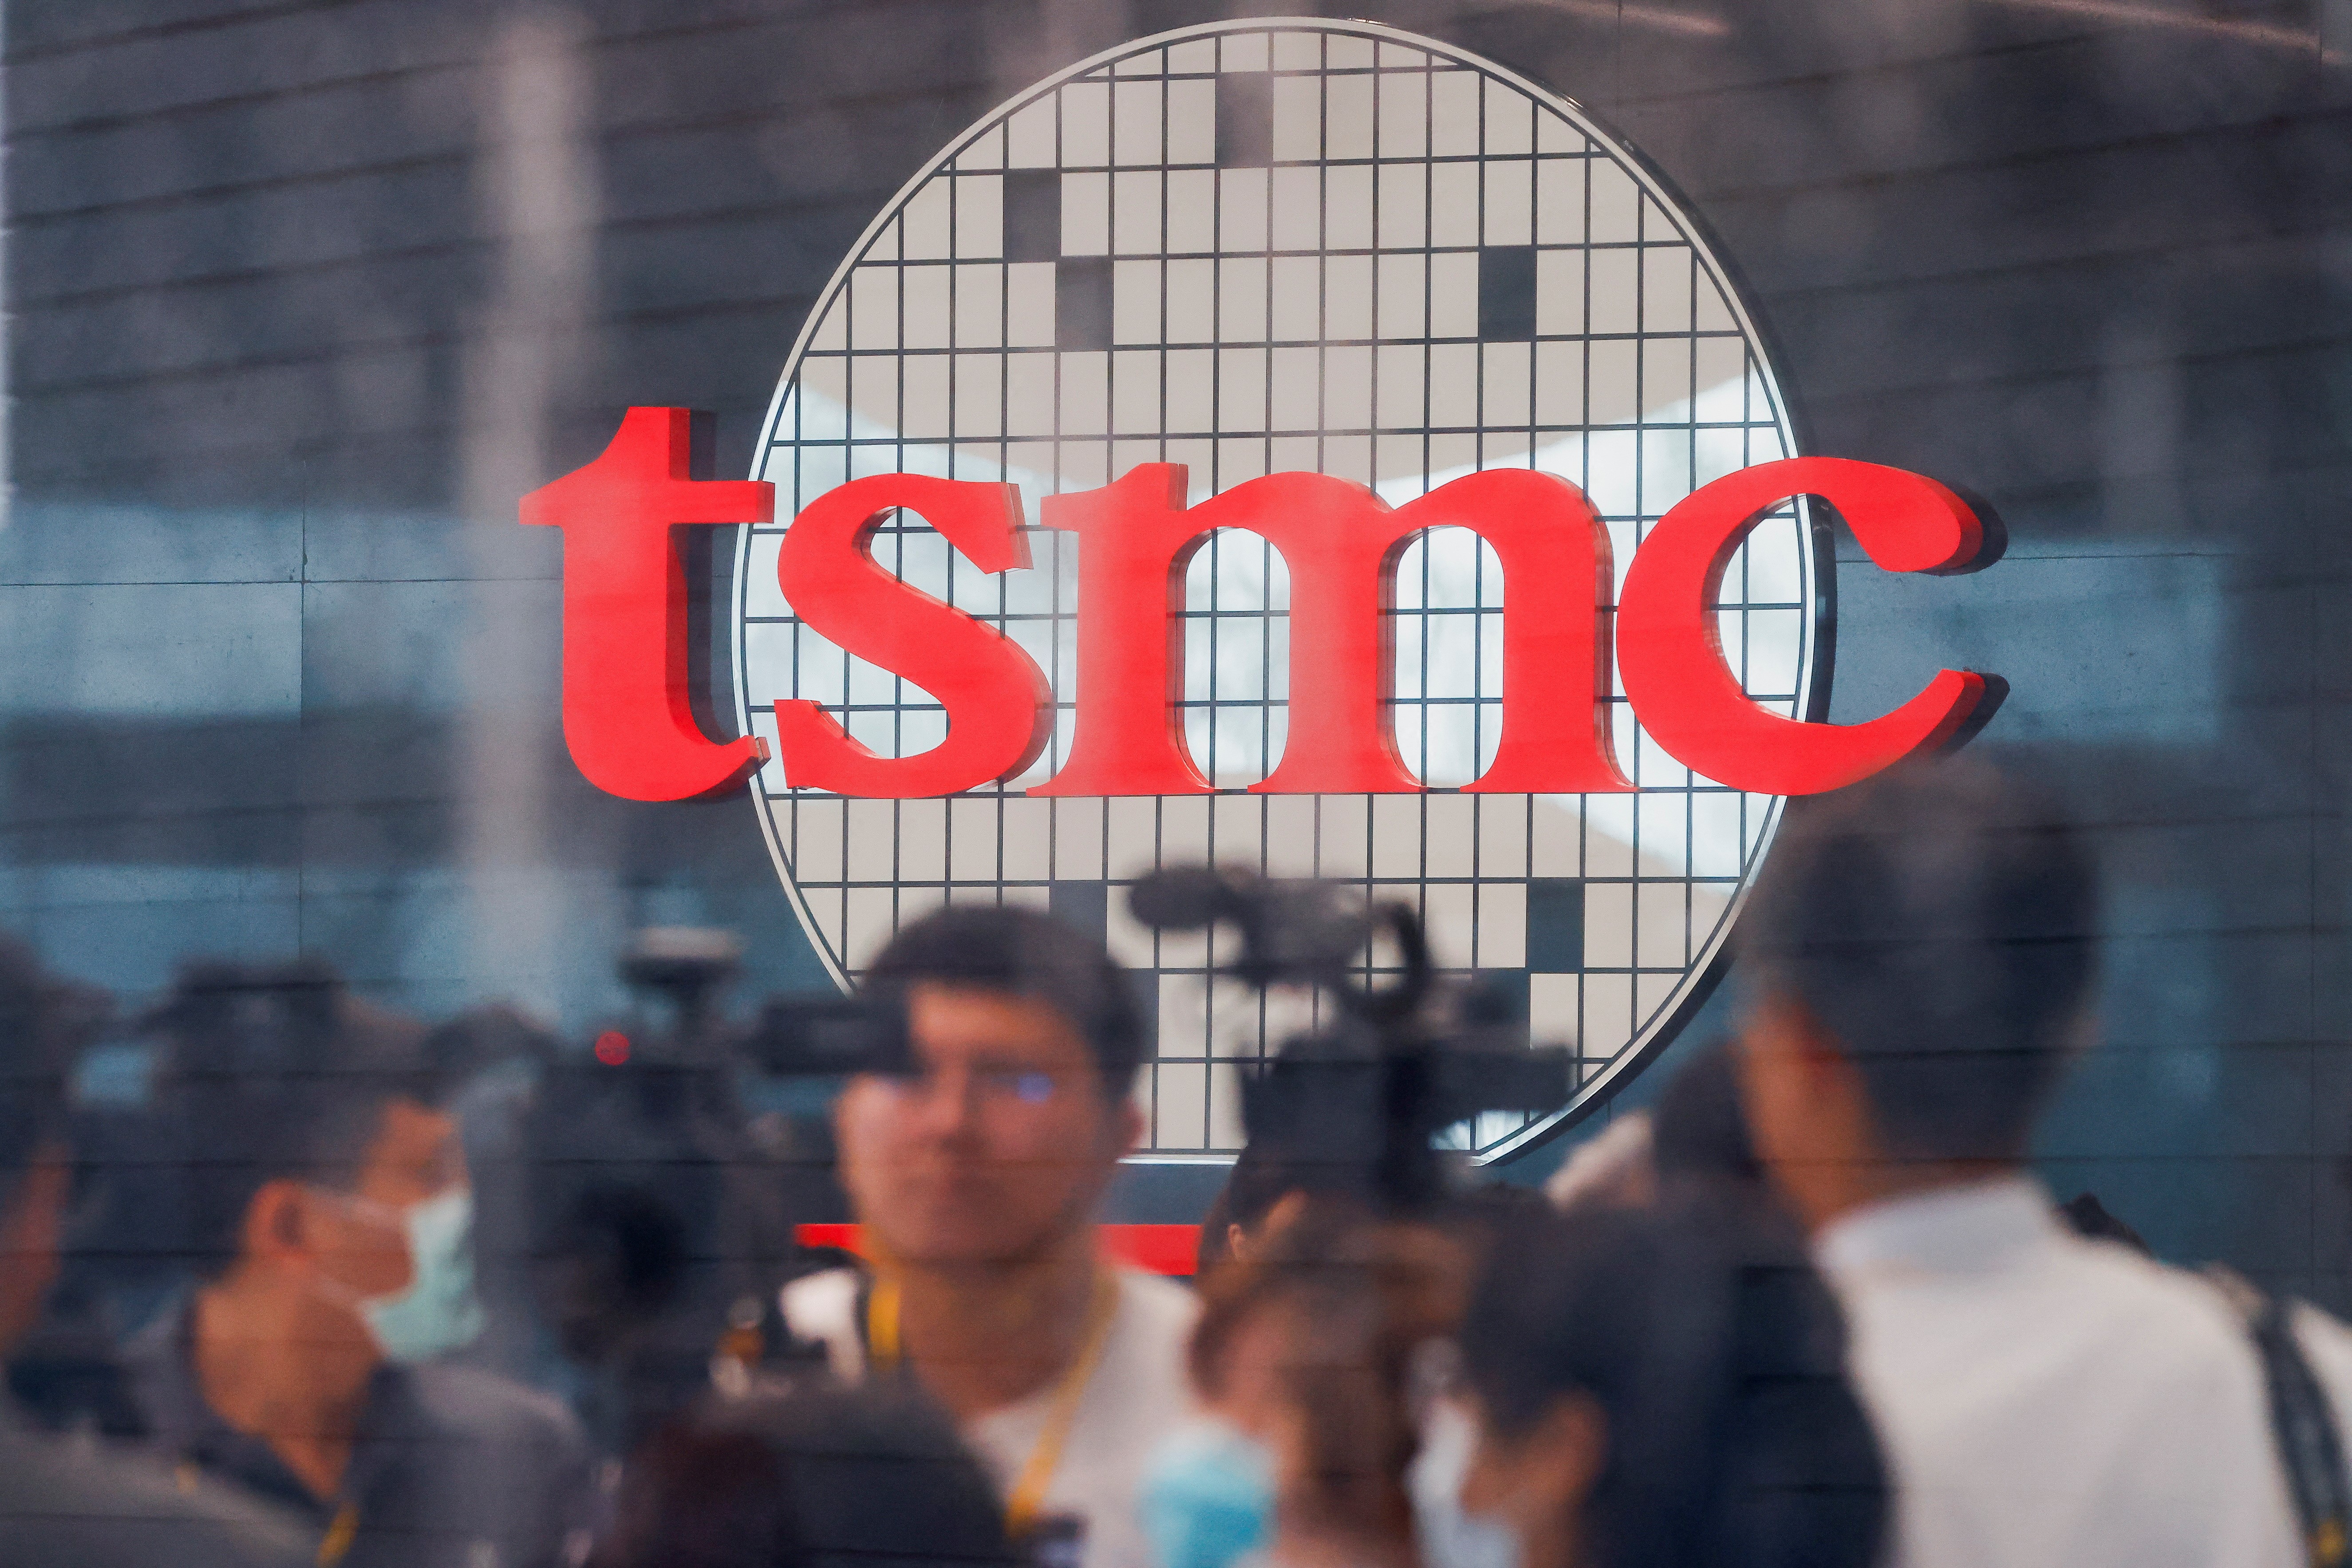 TSMC considering advanced chip packaging capacity in Japan, sources say